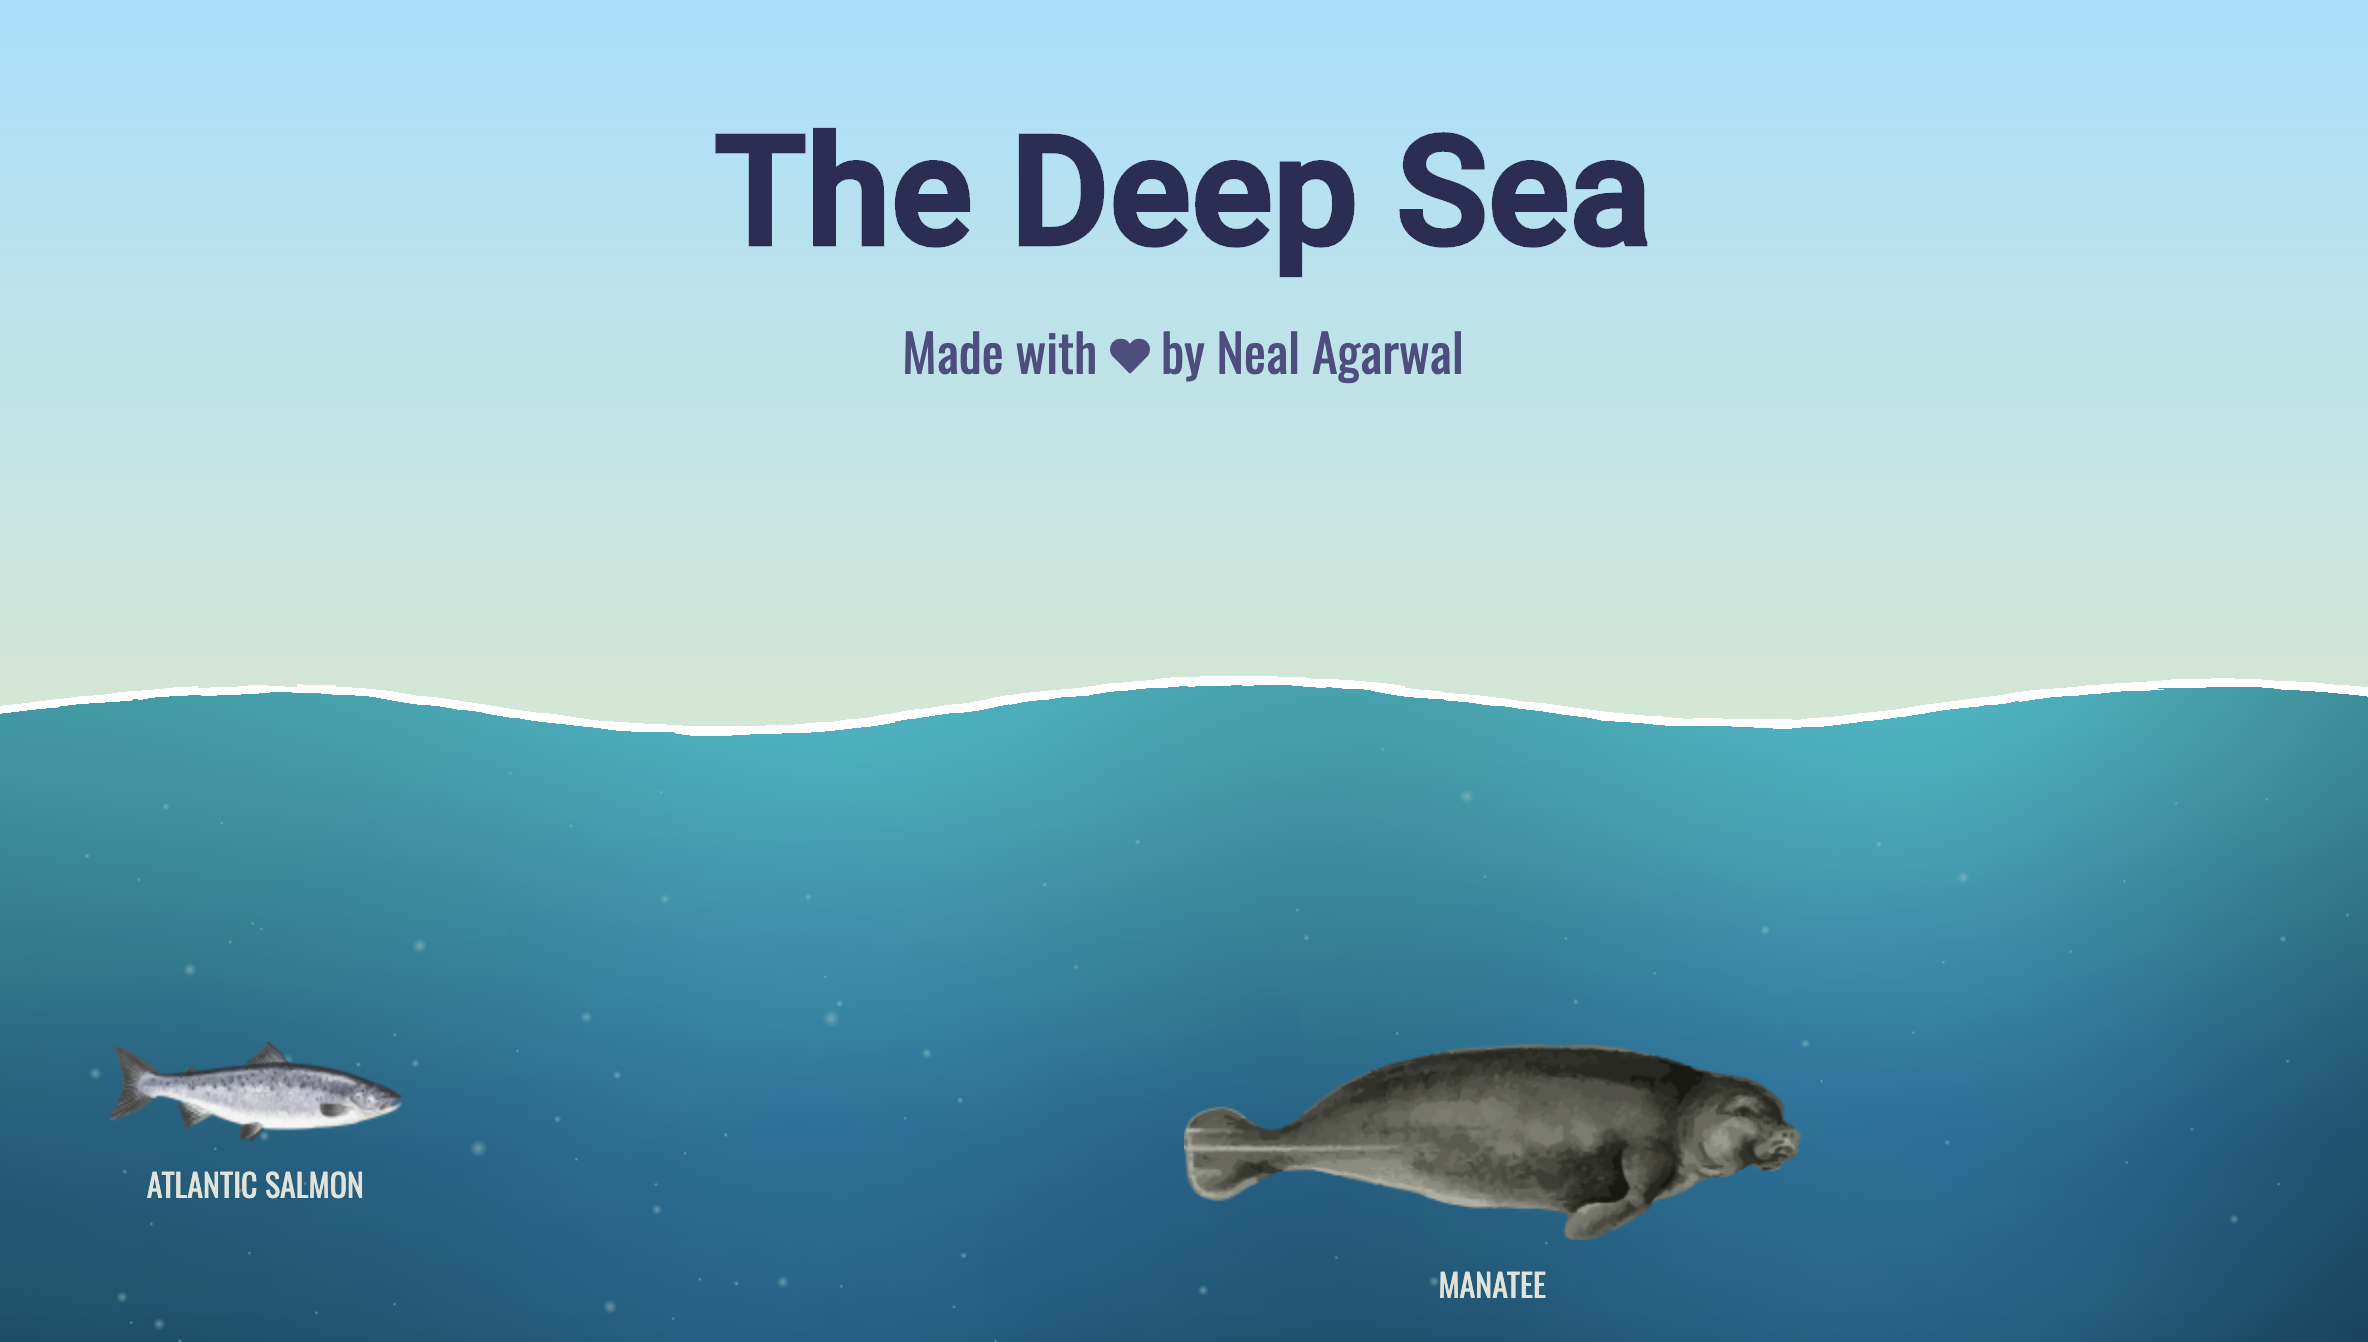 Image result for the deep sea neal agarwal